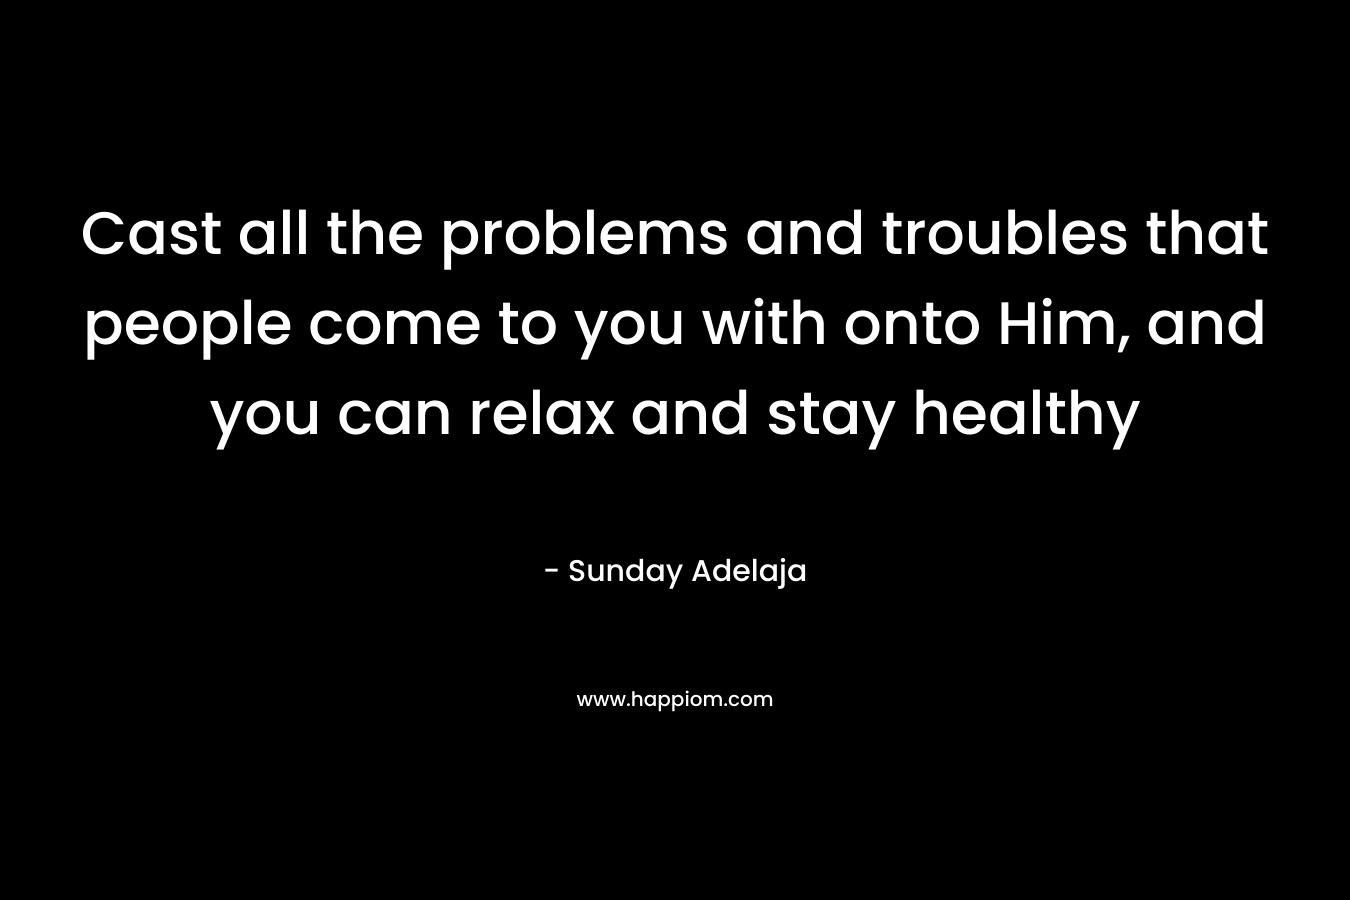 Cast all the problems and troubles that people come to you with onto Him, and you can relax and stay healthy